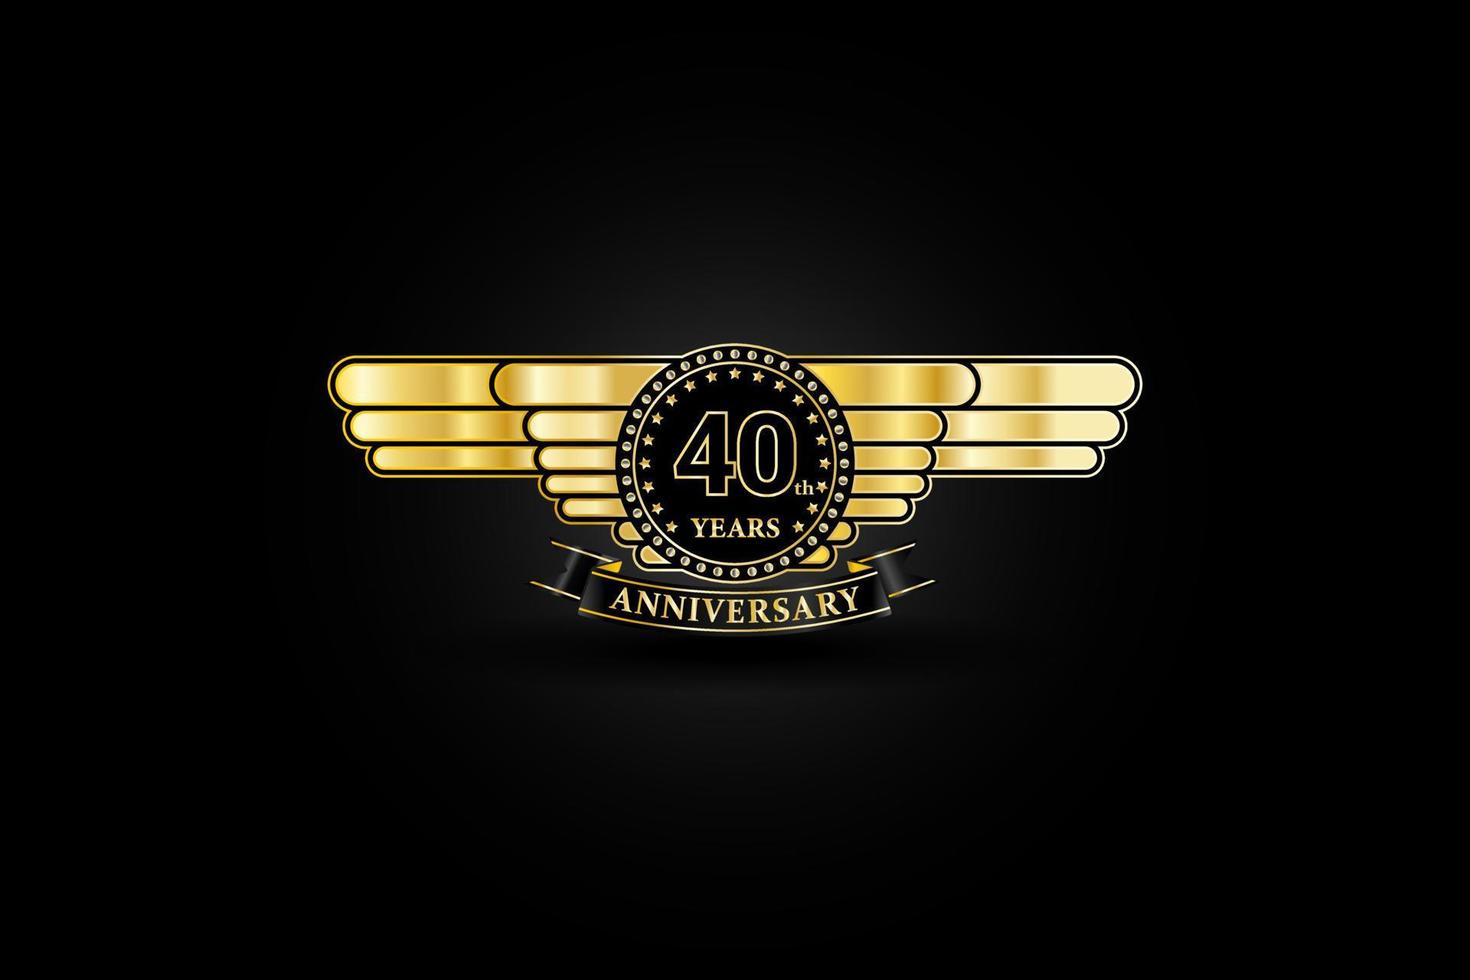 40th anniversary golden gold logo with gold wing and ribbon isolated on black background, vector design for celebration.